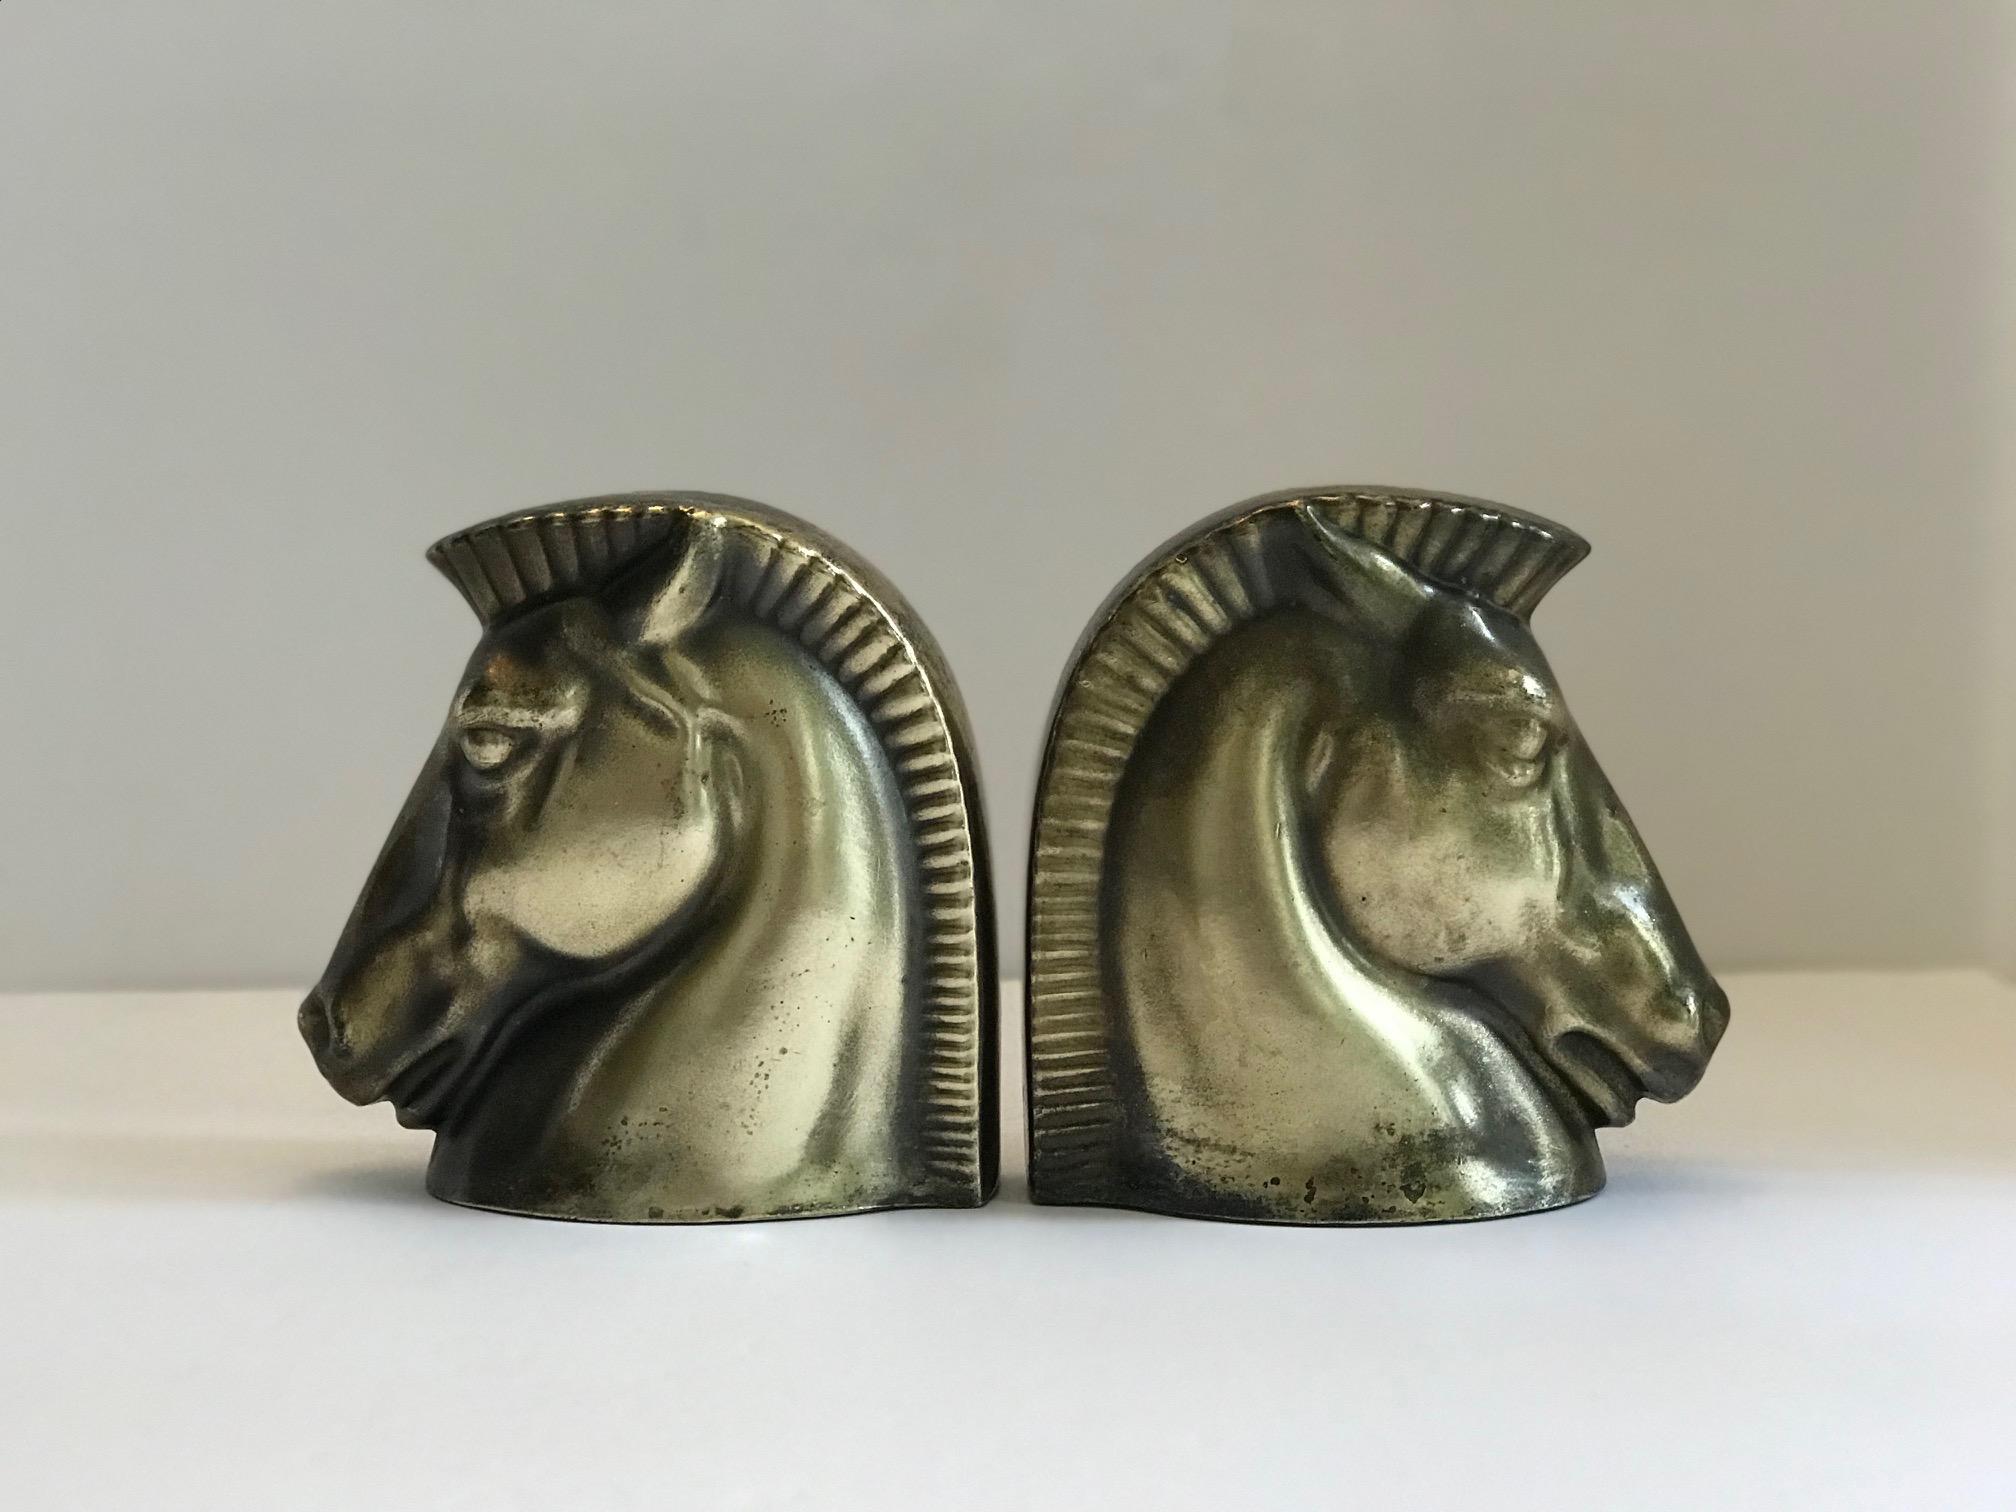 Mid-20th Century Pair of Art Deco Brass Plated Trojan Horse Bookends by Frankart